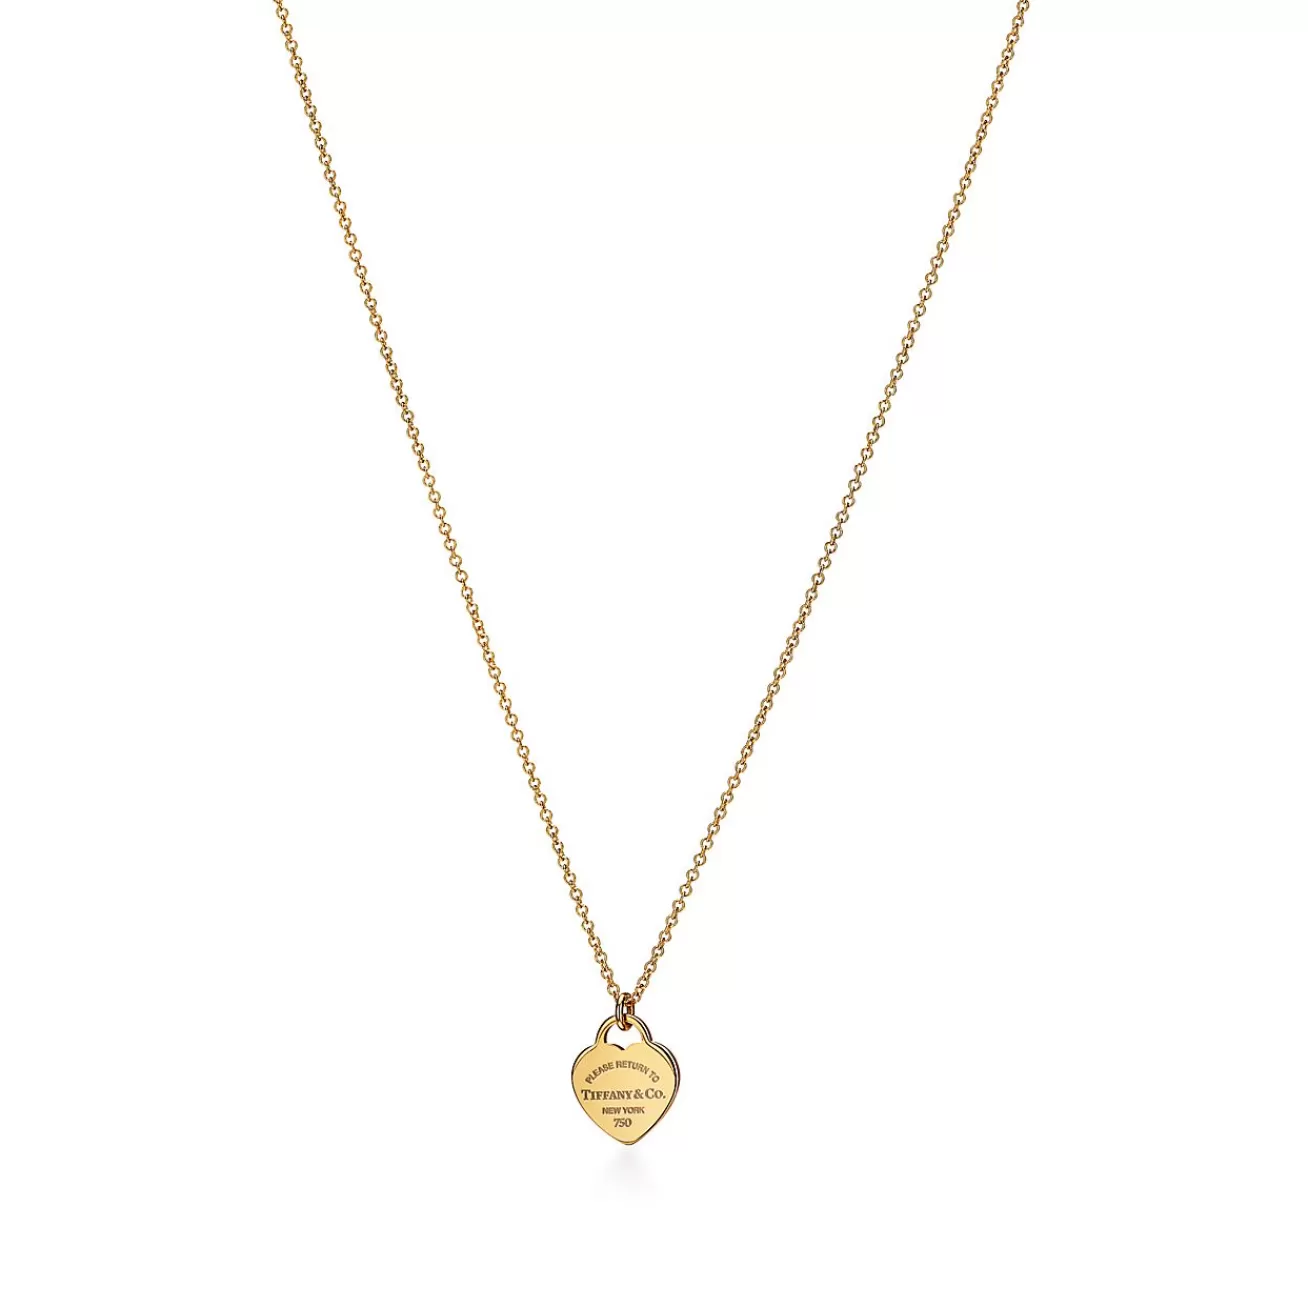 Tiffany & Co. Return to Tiffany® Mini Heart Tag Pendant in Yellow Gold | ^ Necklaces & Pendants | Gifts for Her